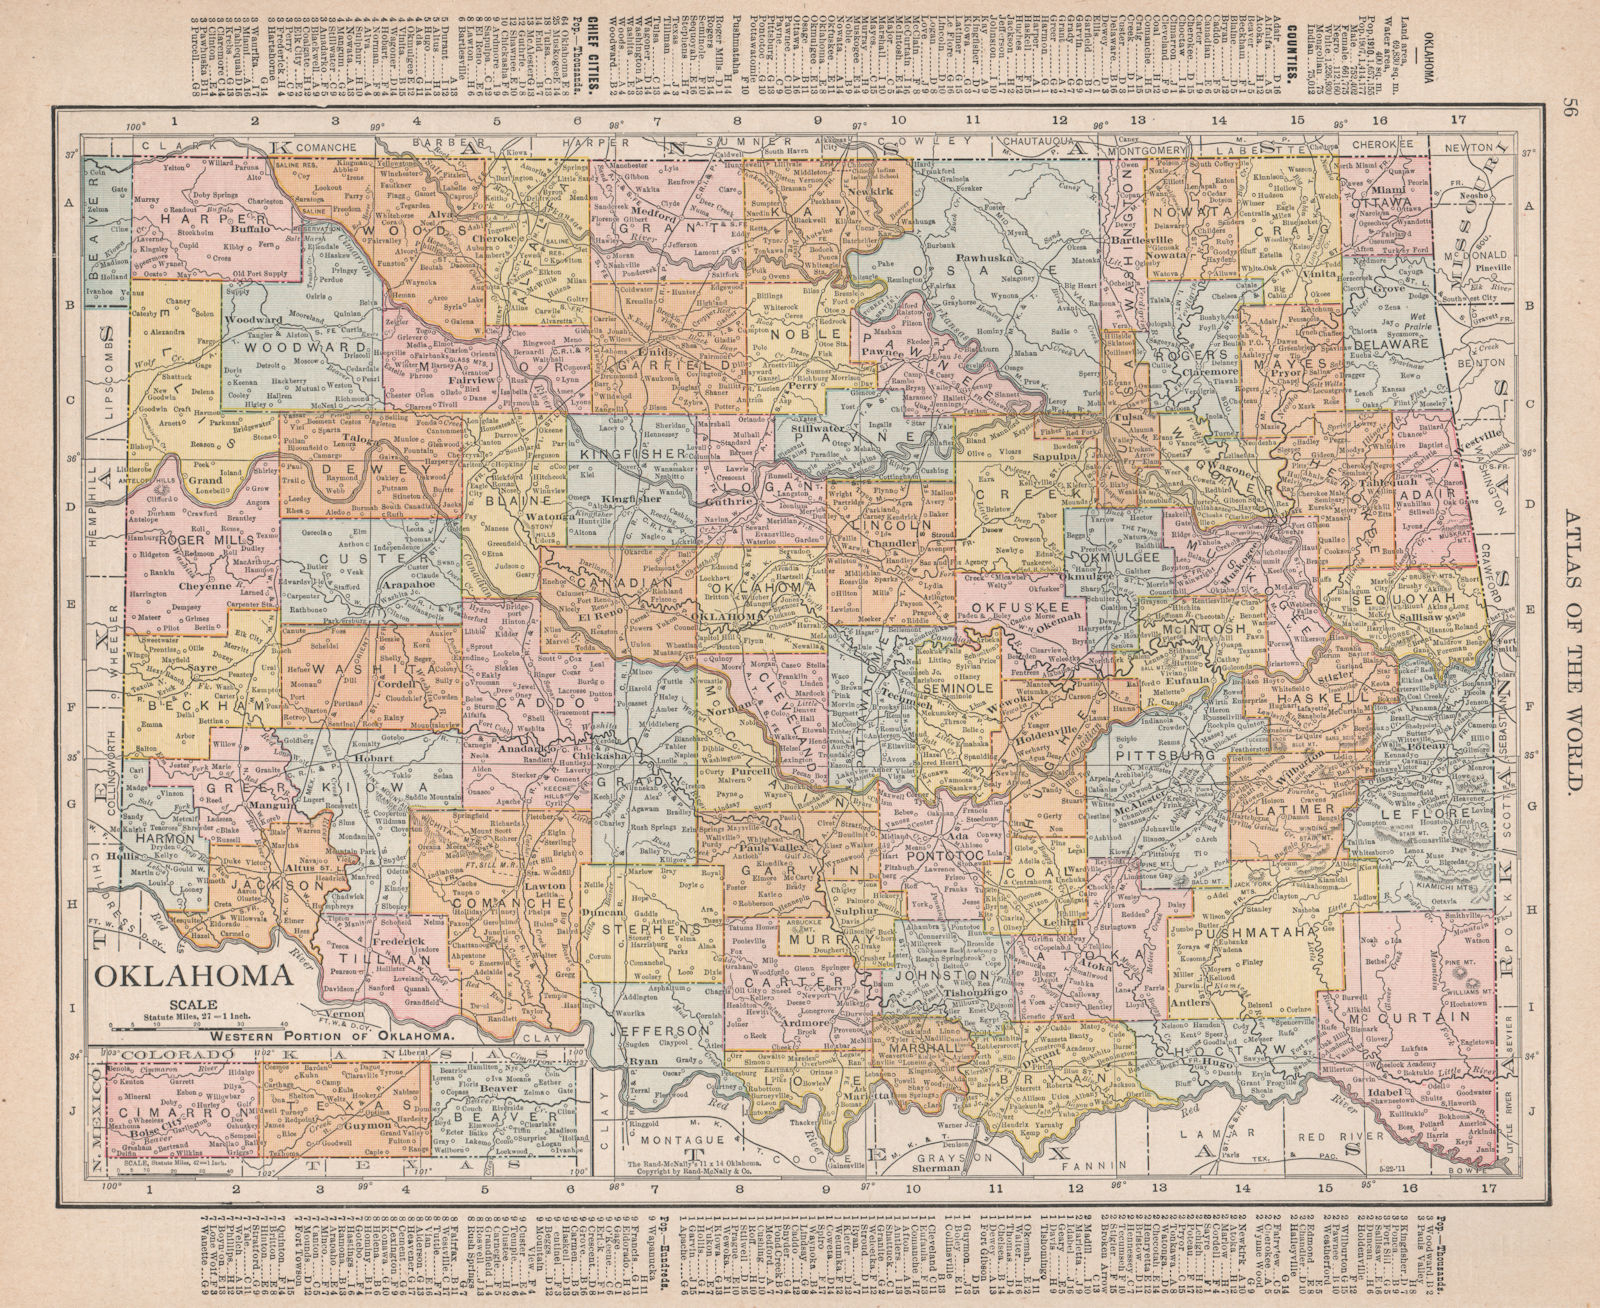 Associate Product Oklahoma state map showing counties. RAND MCNALLY 1912 old antique chart